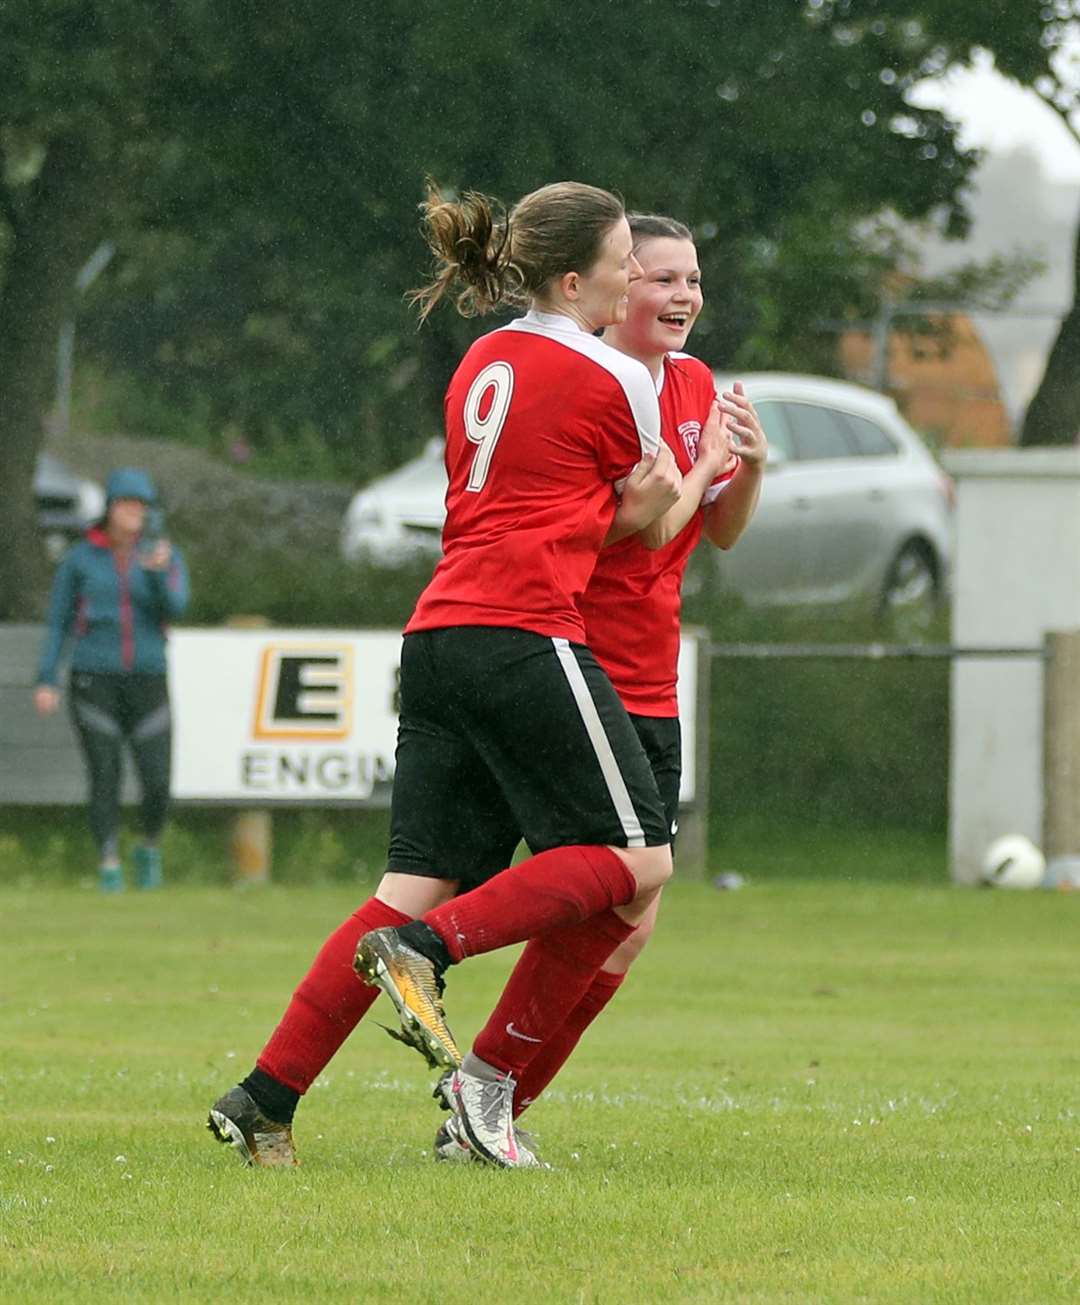 No. 9 Carly Erridge congratulates Anna Foubister on scoring her first goal for the team. Picture: James Gunn